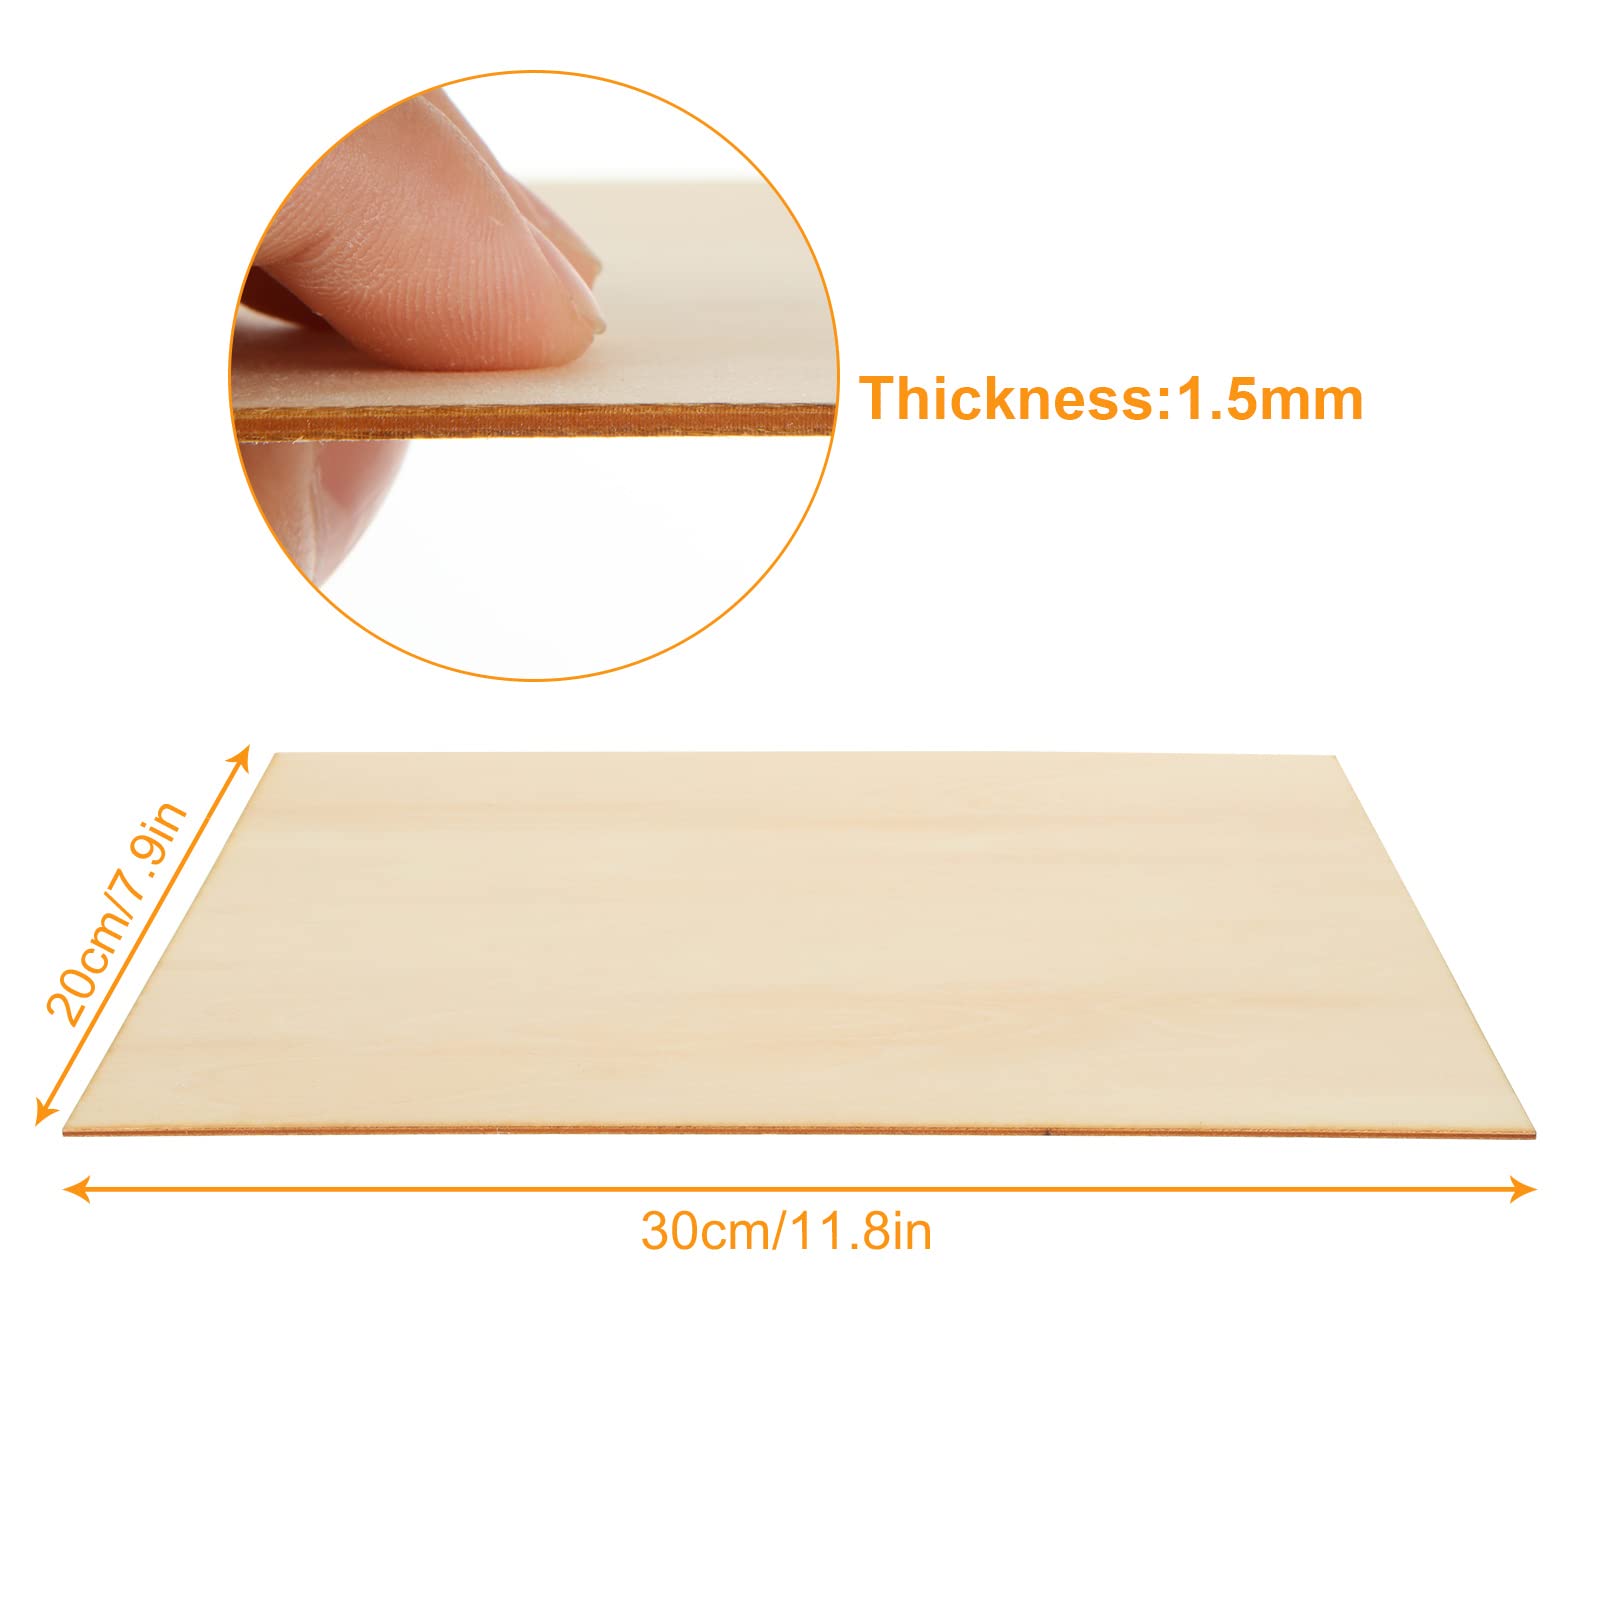  Basswood Sheets 1/16, Craft Wood 10 Pack - 12 X 12 X 1/16  Inch - Cricut Wood Sheets 1.5mm, Plywood Sheets